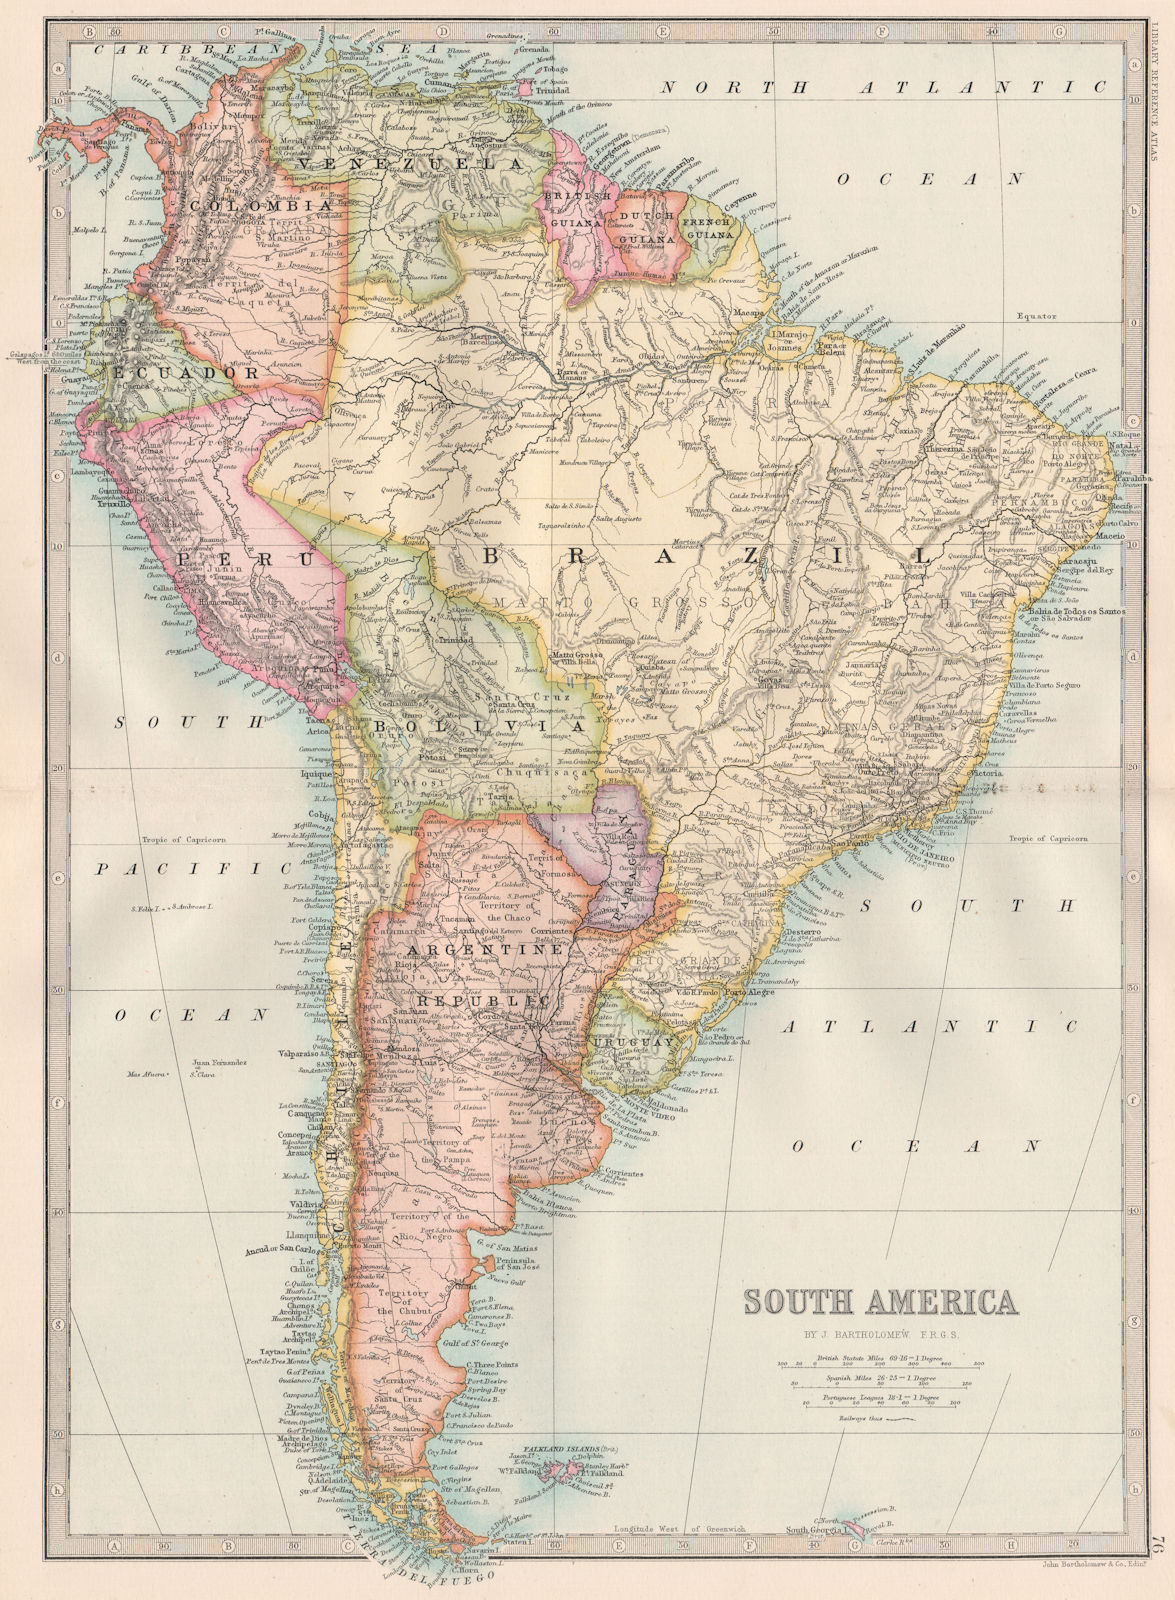 Associate Product SOUTH AMERICA. general map. BARTHOLOMEW 1890 old antique plan chart